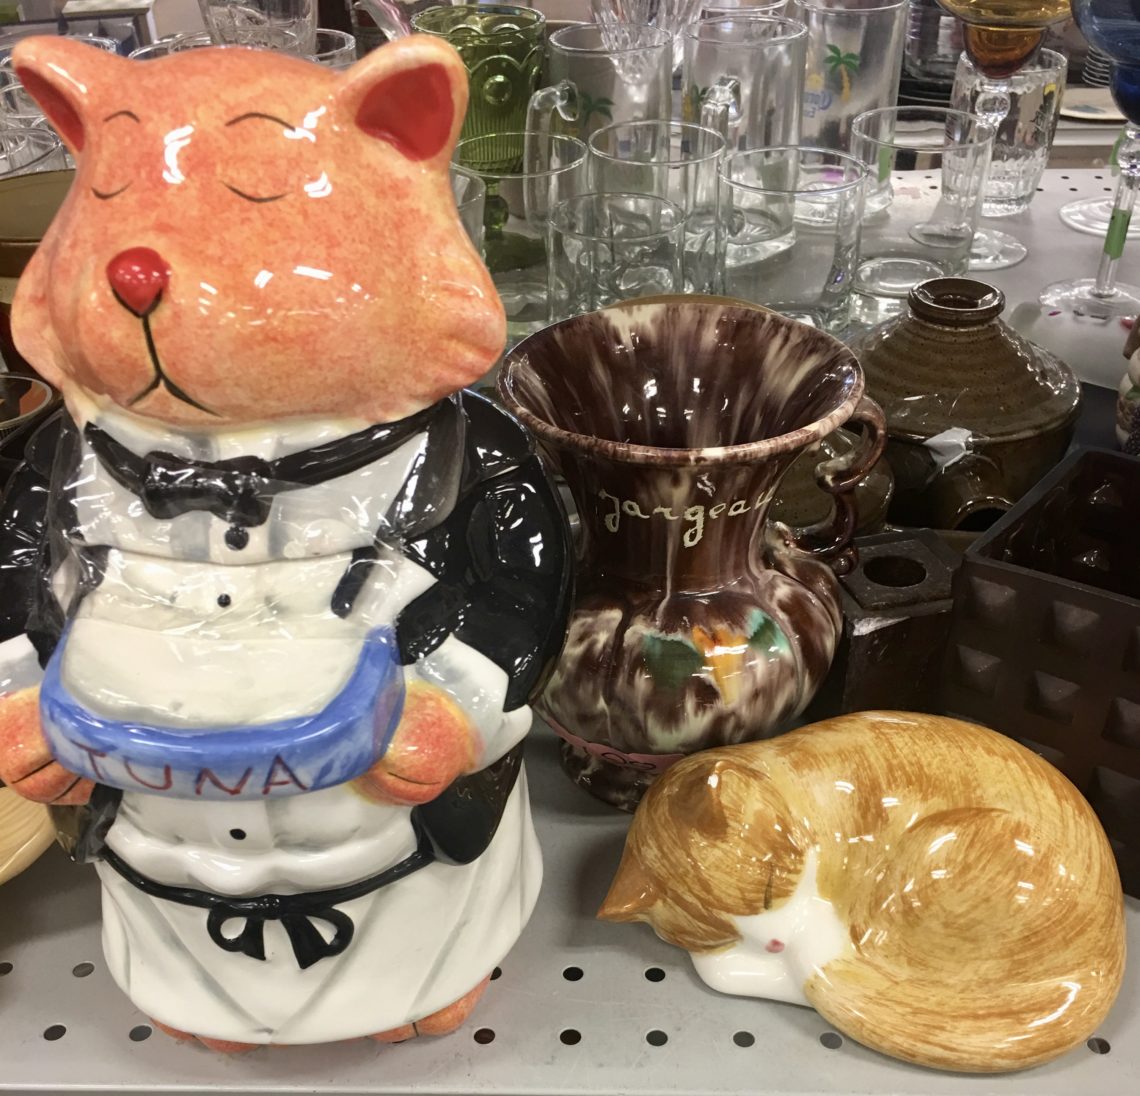 A cat-themed cookie jar and statue